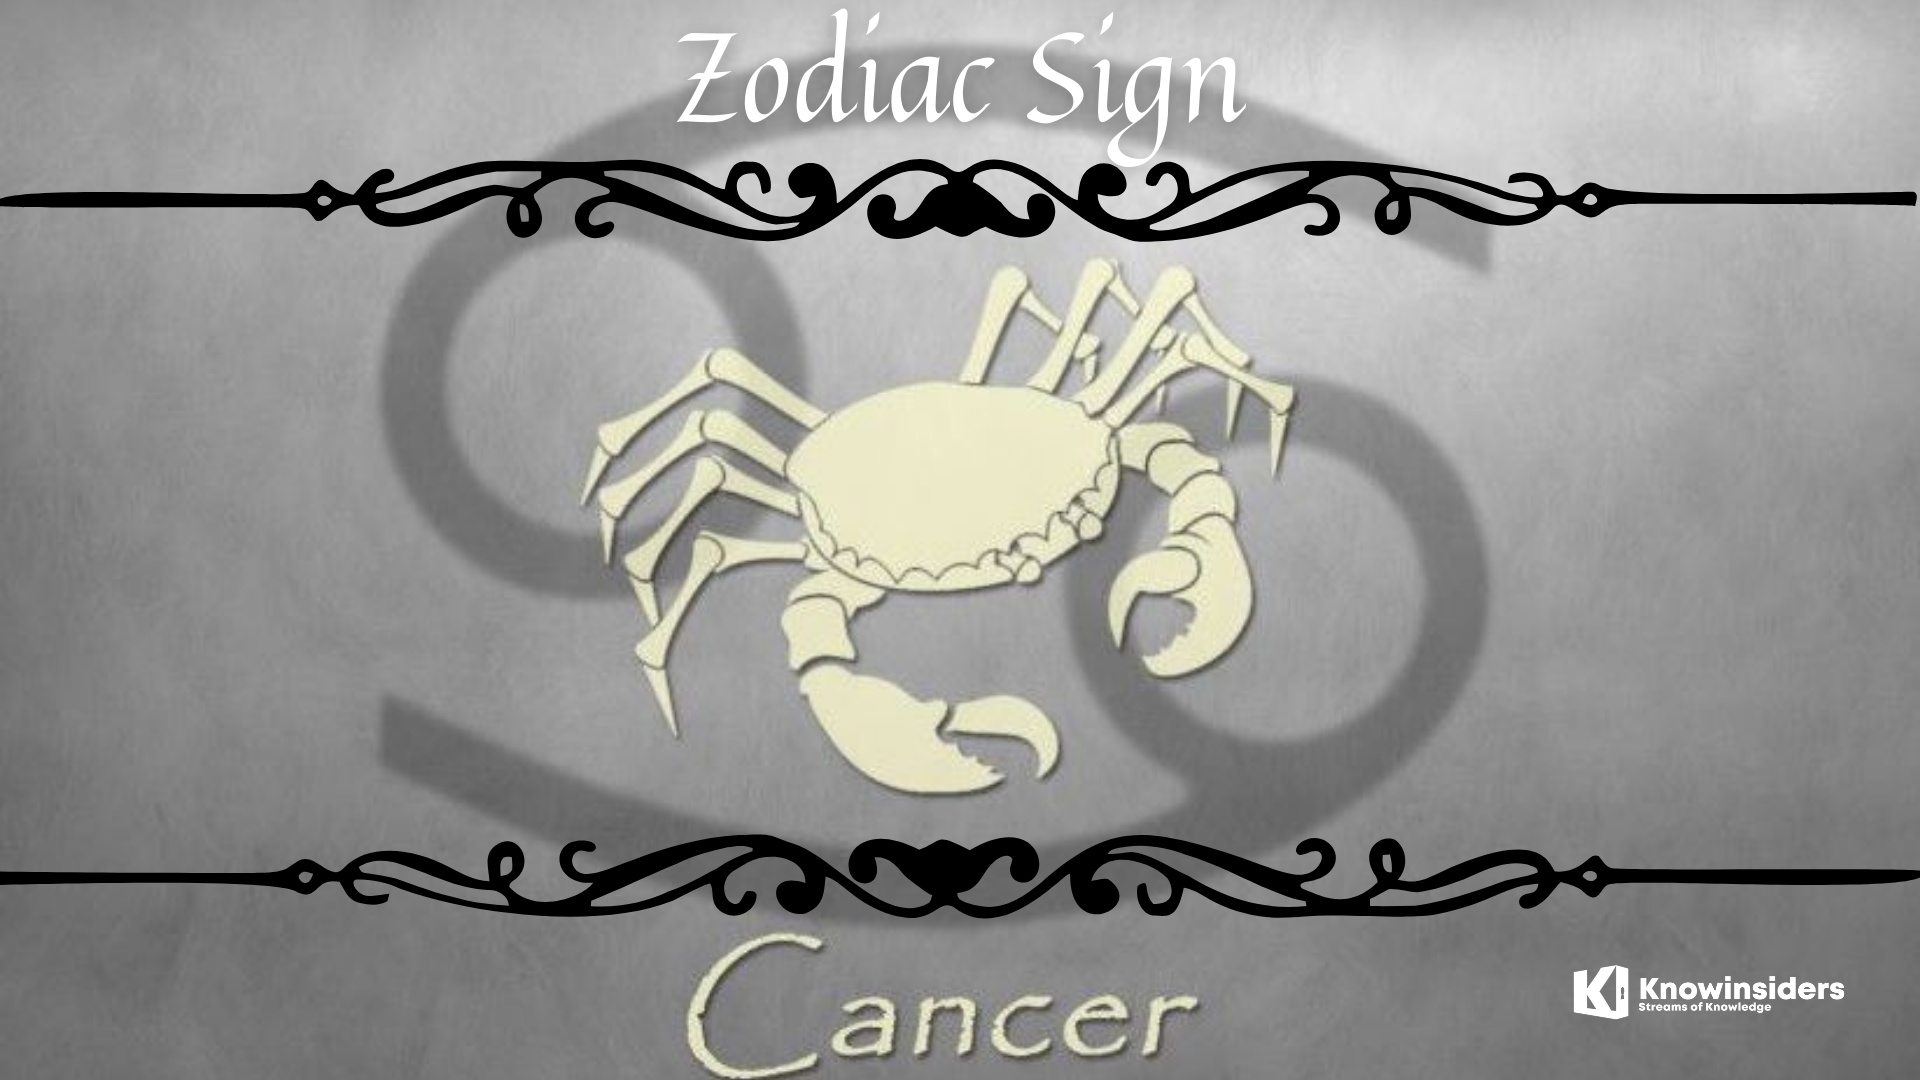 Matches sign with zodiac cancer which 